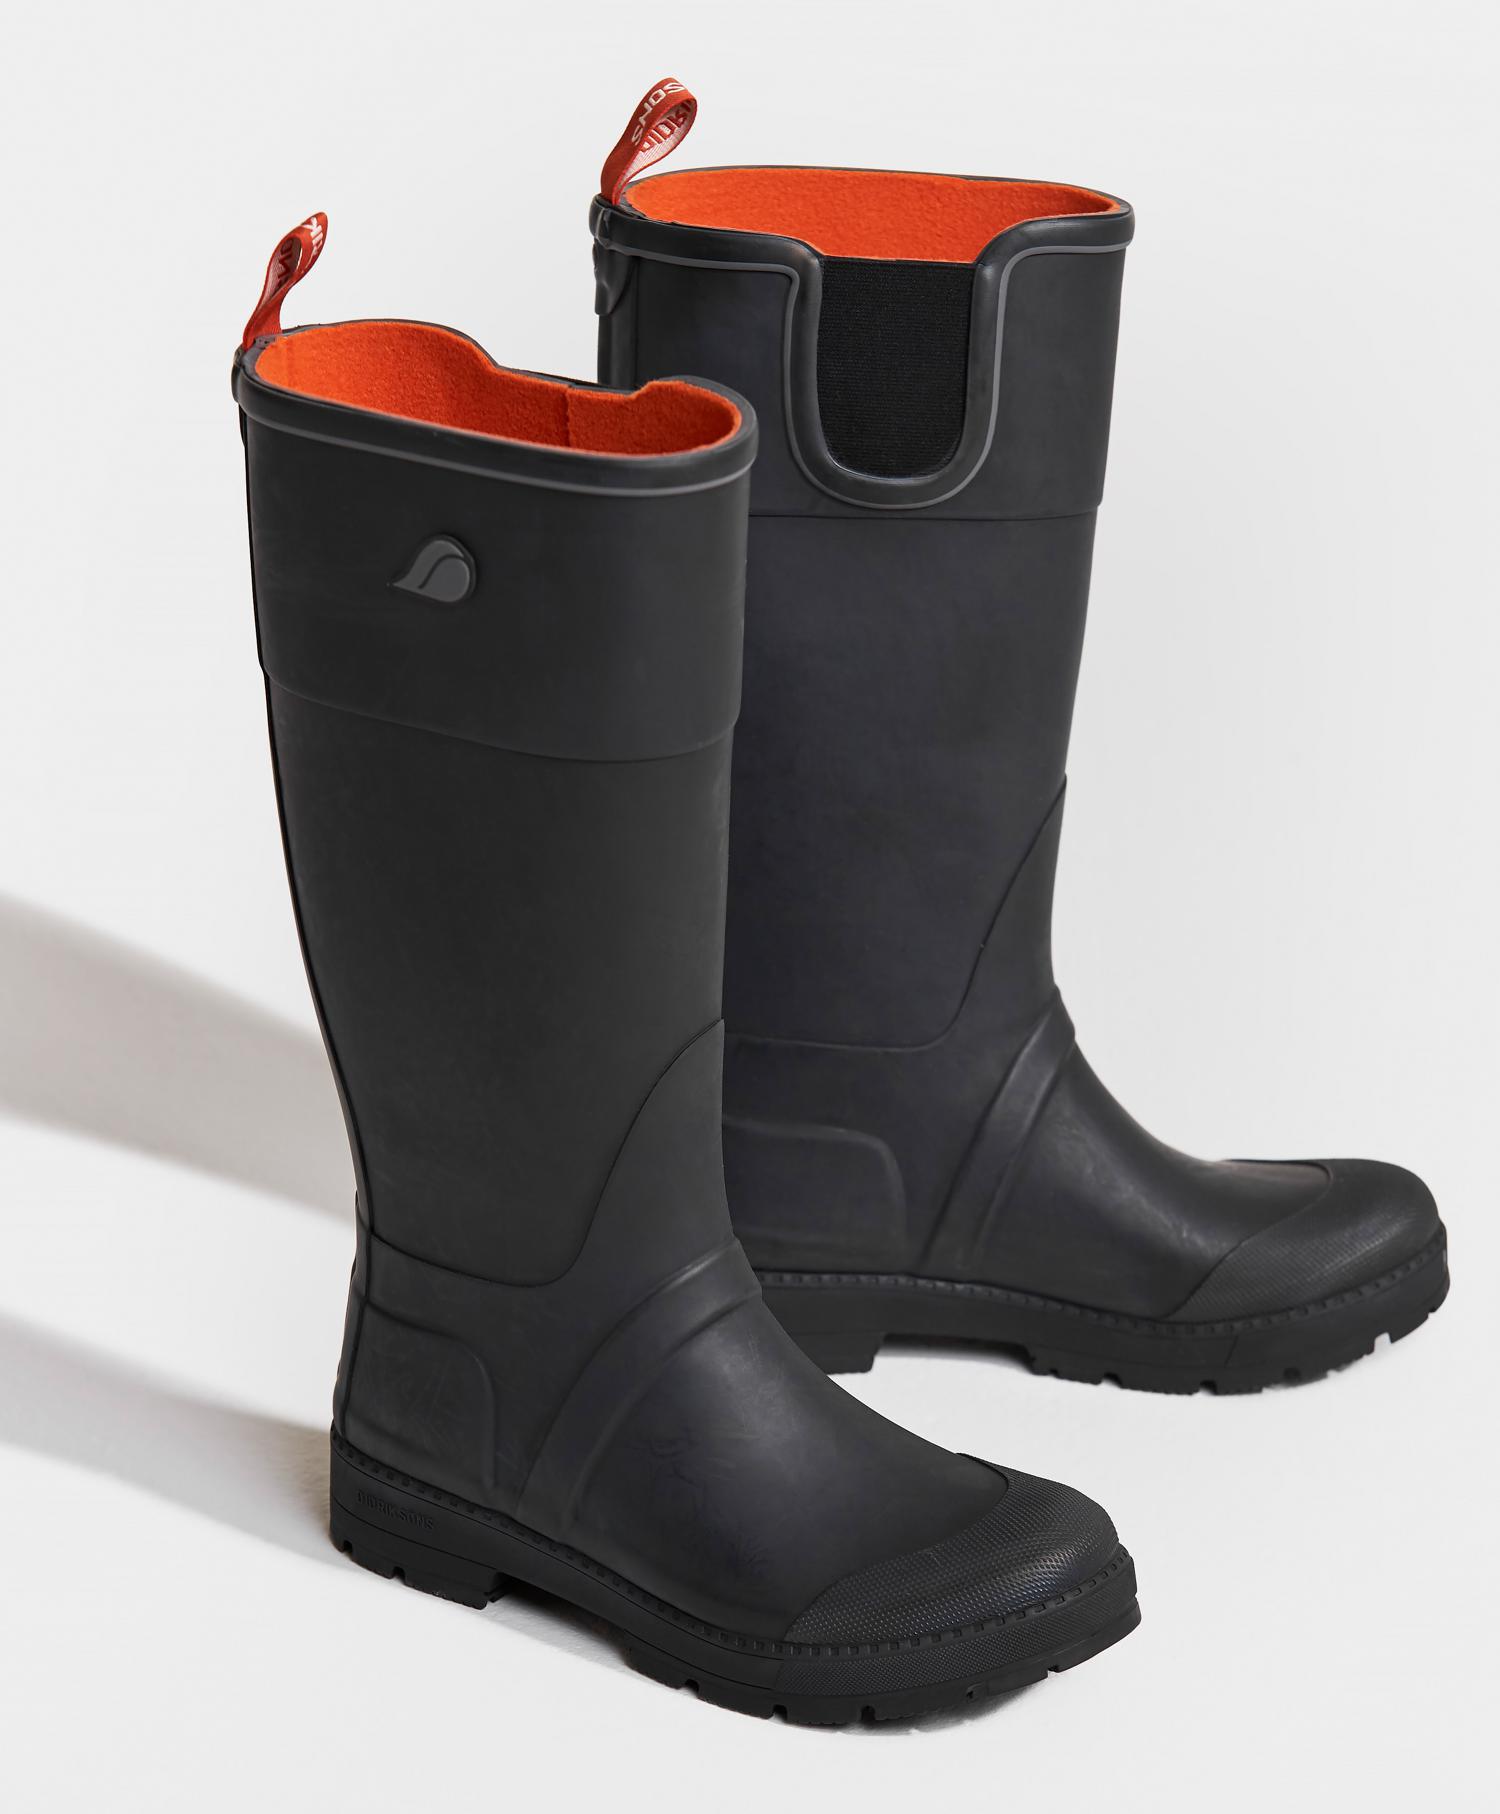 Didriksons Koster Rubber boot